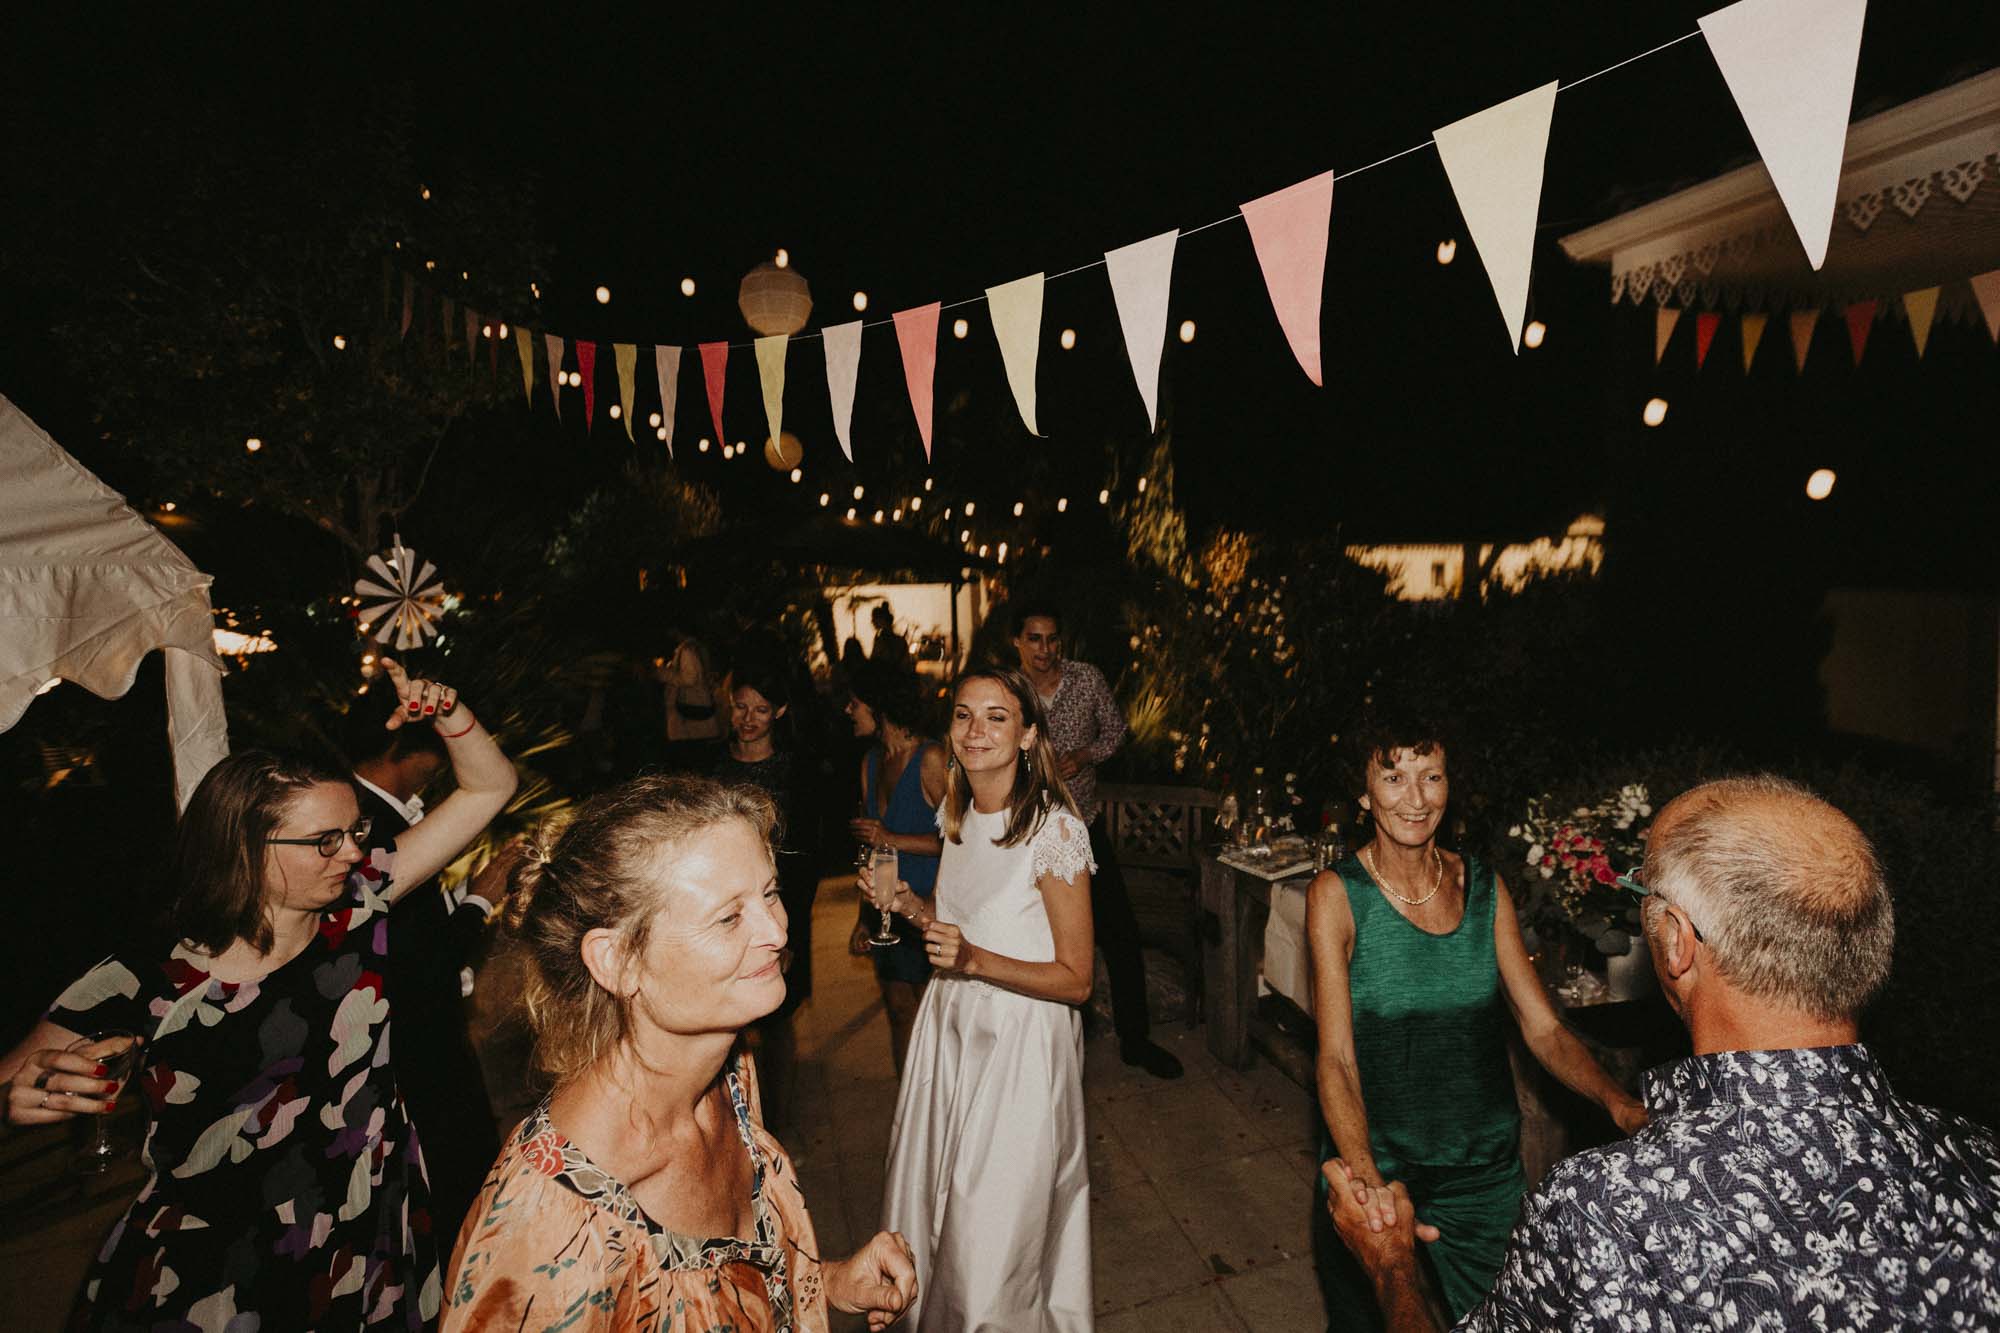 Bordeaux wedding photographer: the guests are enjoying the party in this Arcachon home